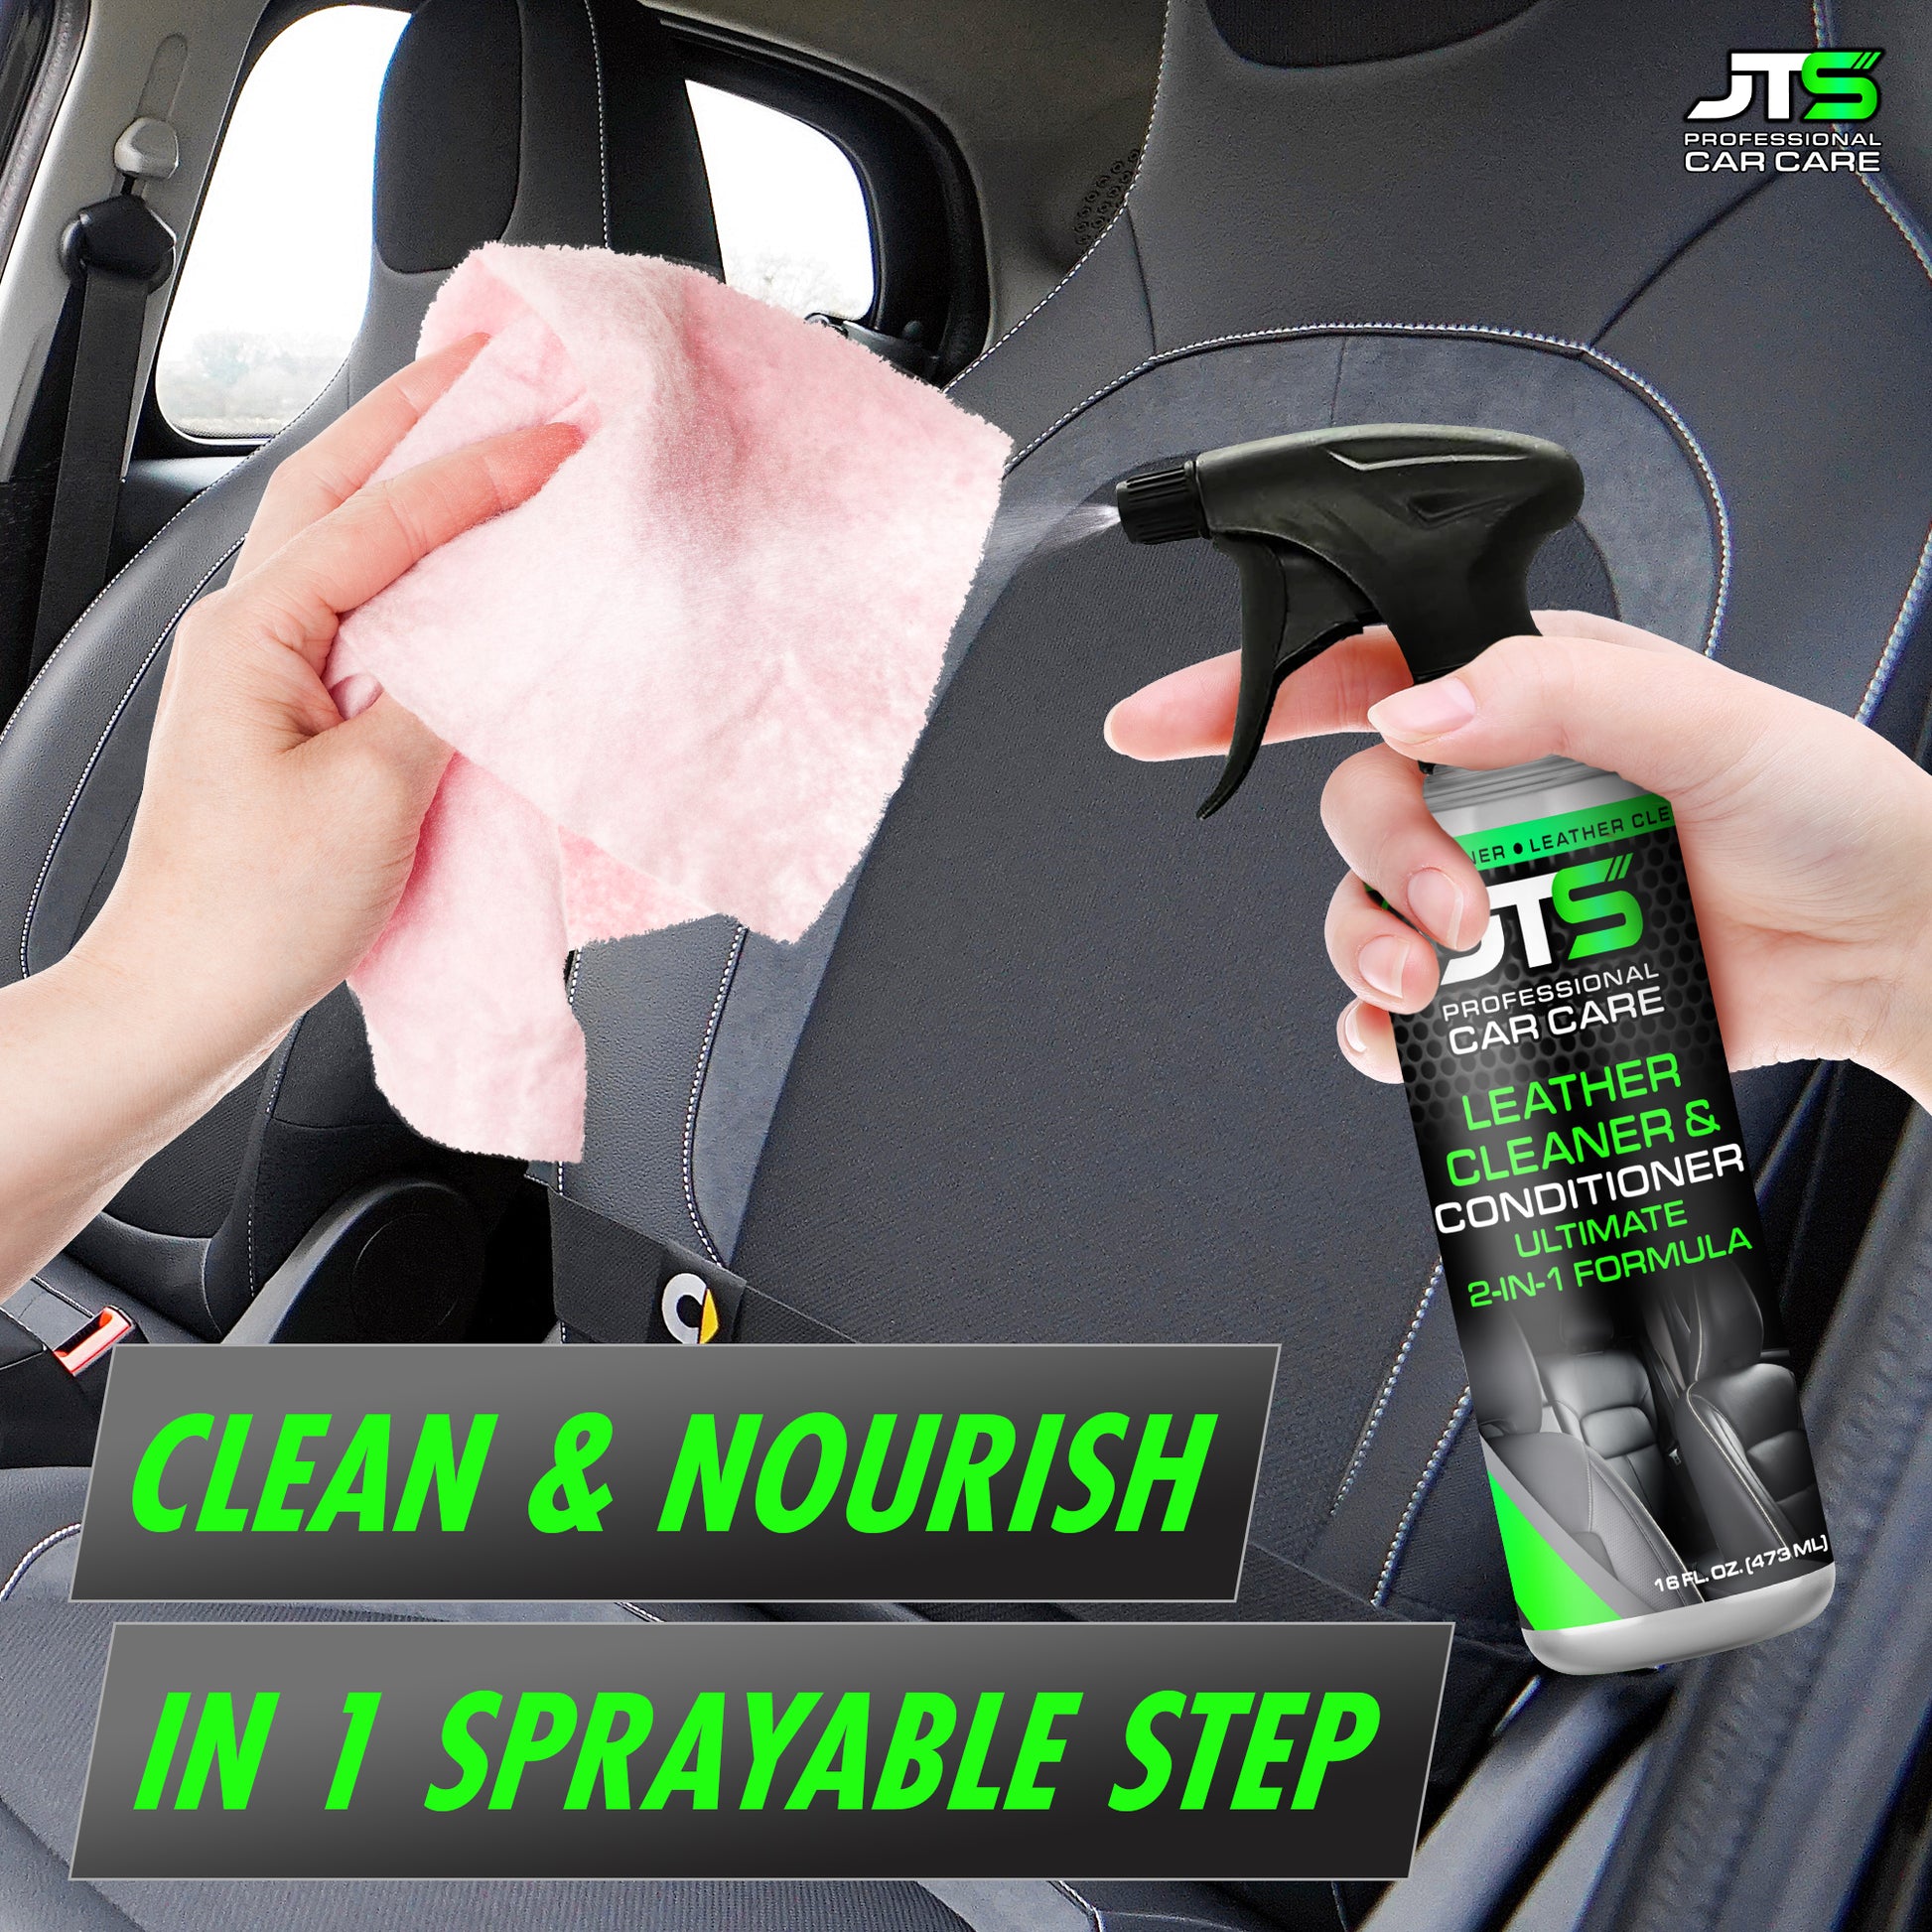 Carpet & Upholstery Cleaner - Powerful Car Carpet Cleaner For Auto Detailing